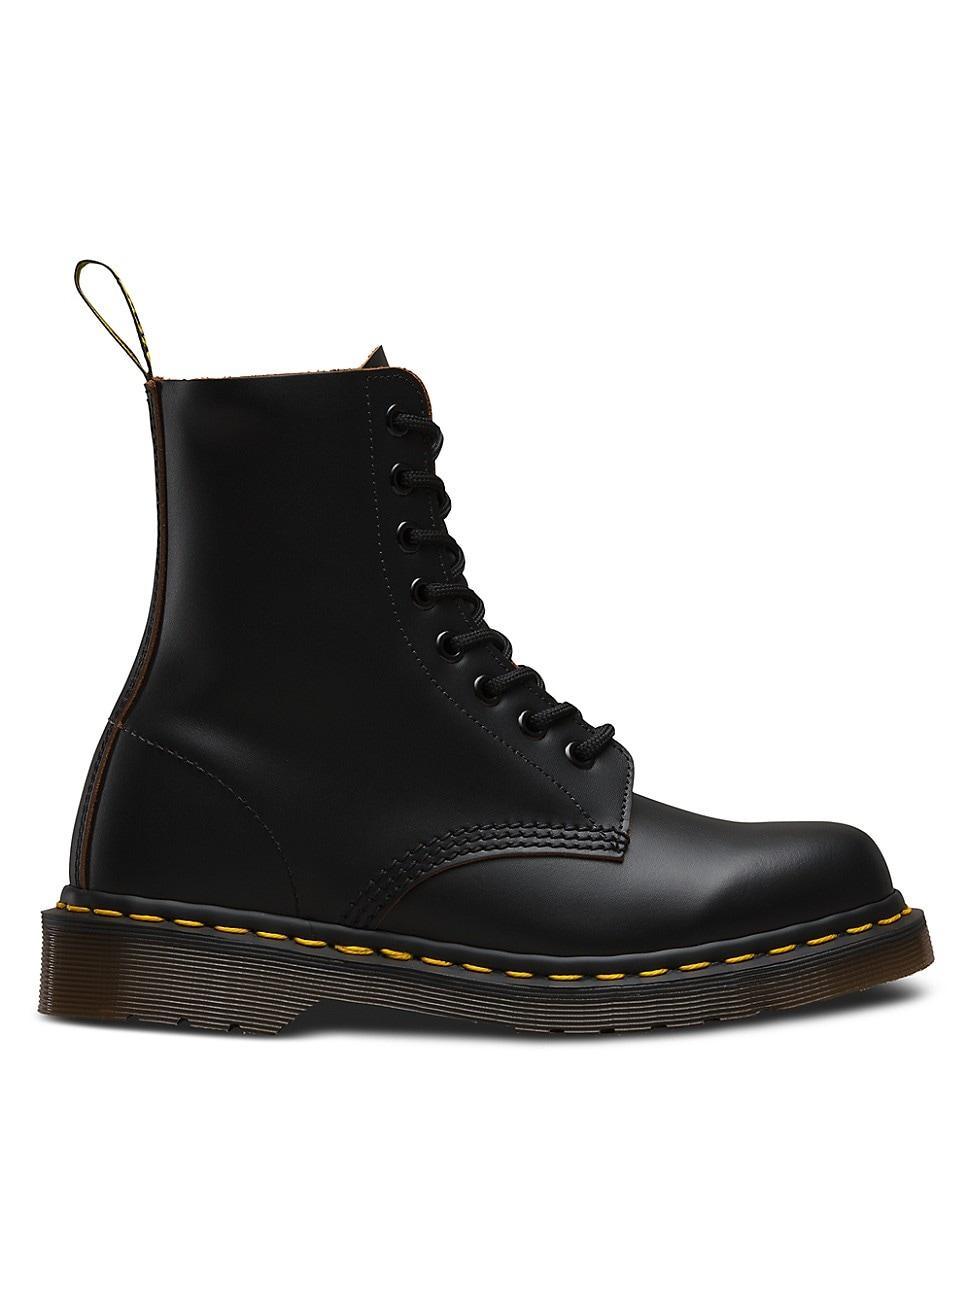 Dr. Martens 1460 Boot Product Image